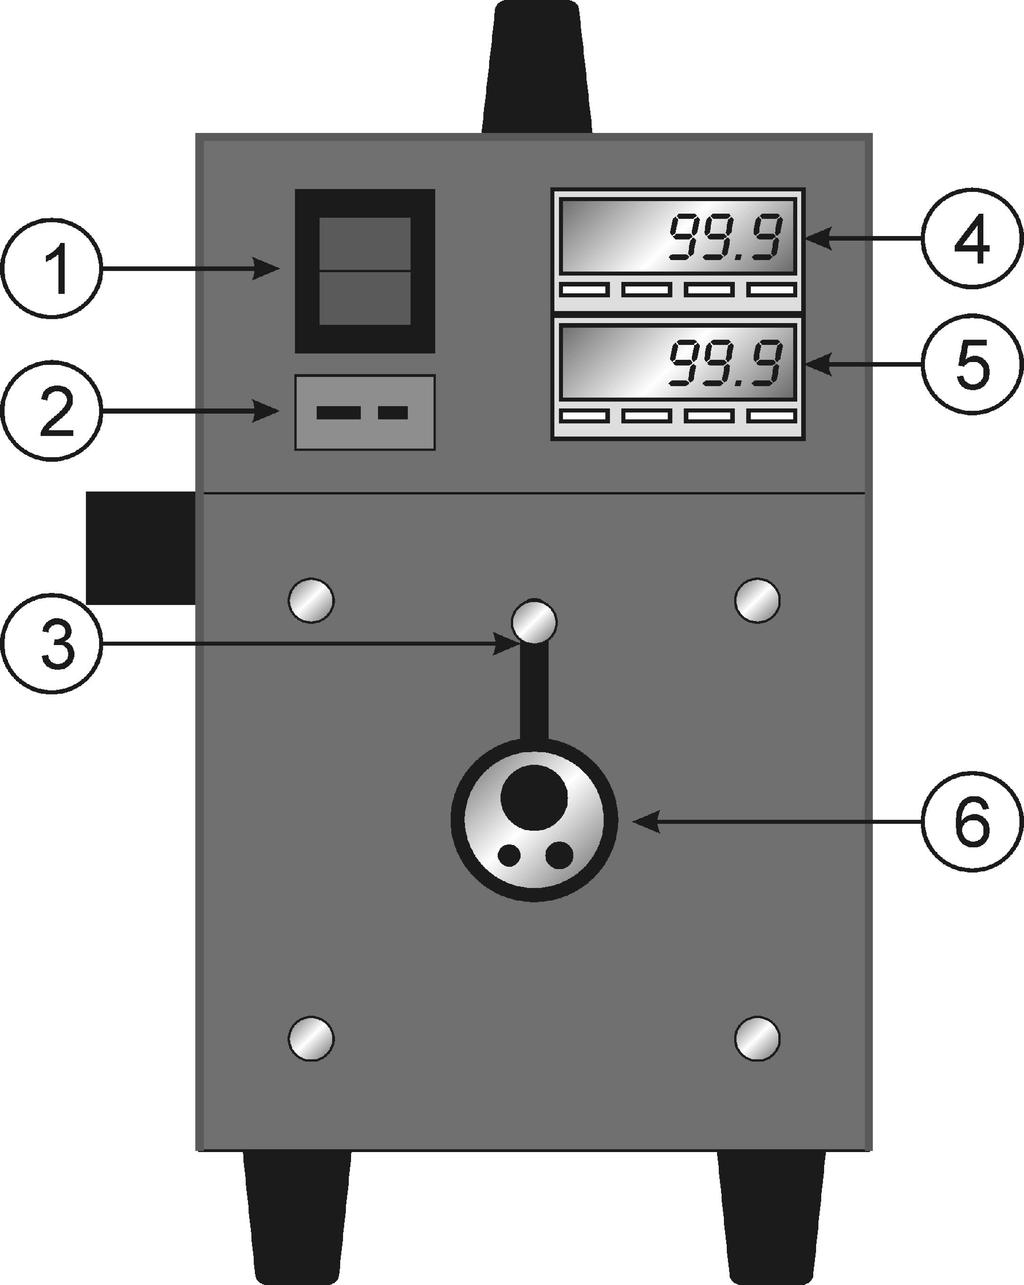 1. SWITCH 2. T/C SOCKET 3. SHUTTER CONTROL 4. CONTROLLER 5. INDICATOR 6.